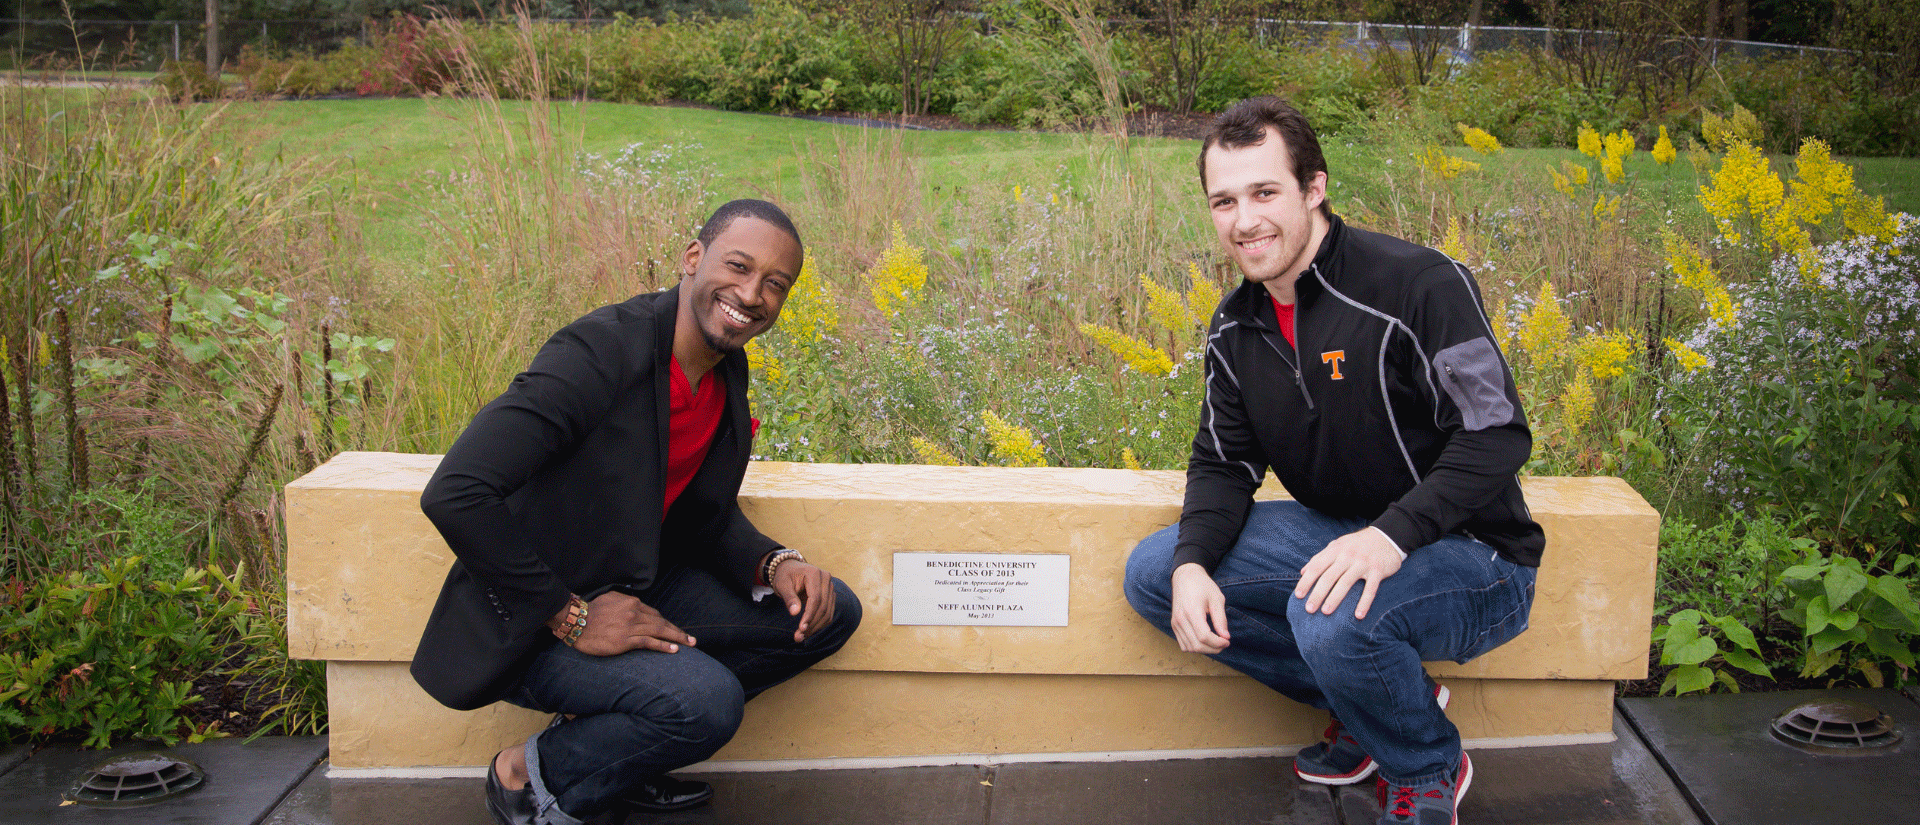 alumni students sitting by bench dedicated to their class